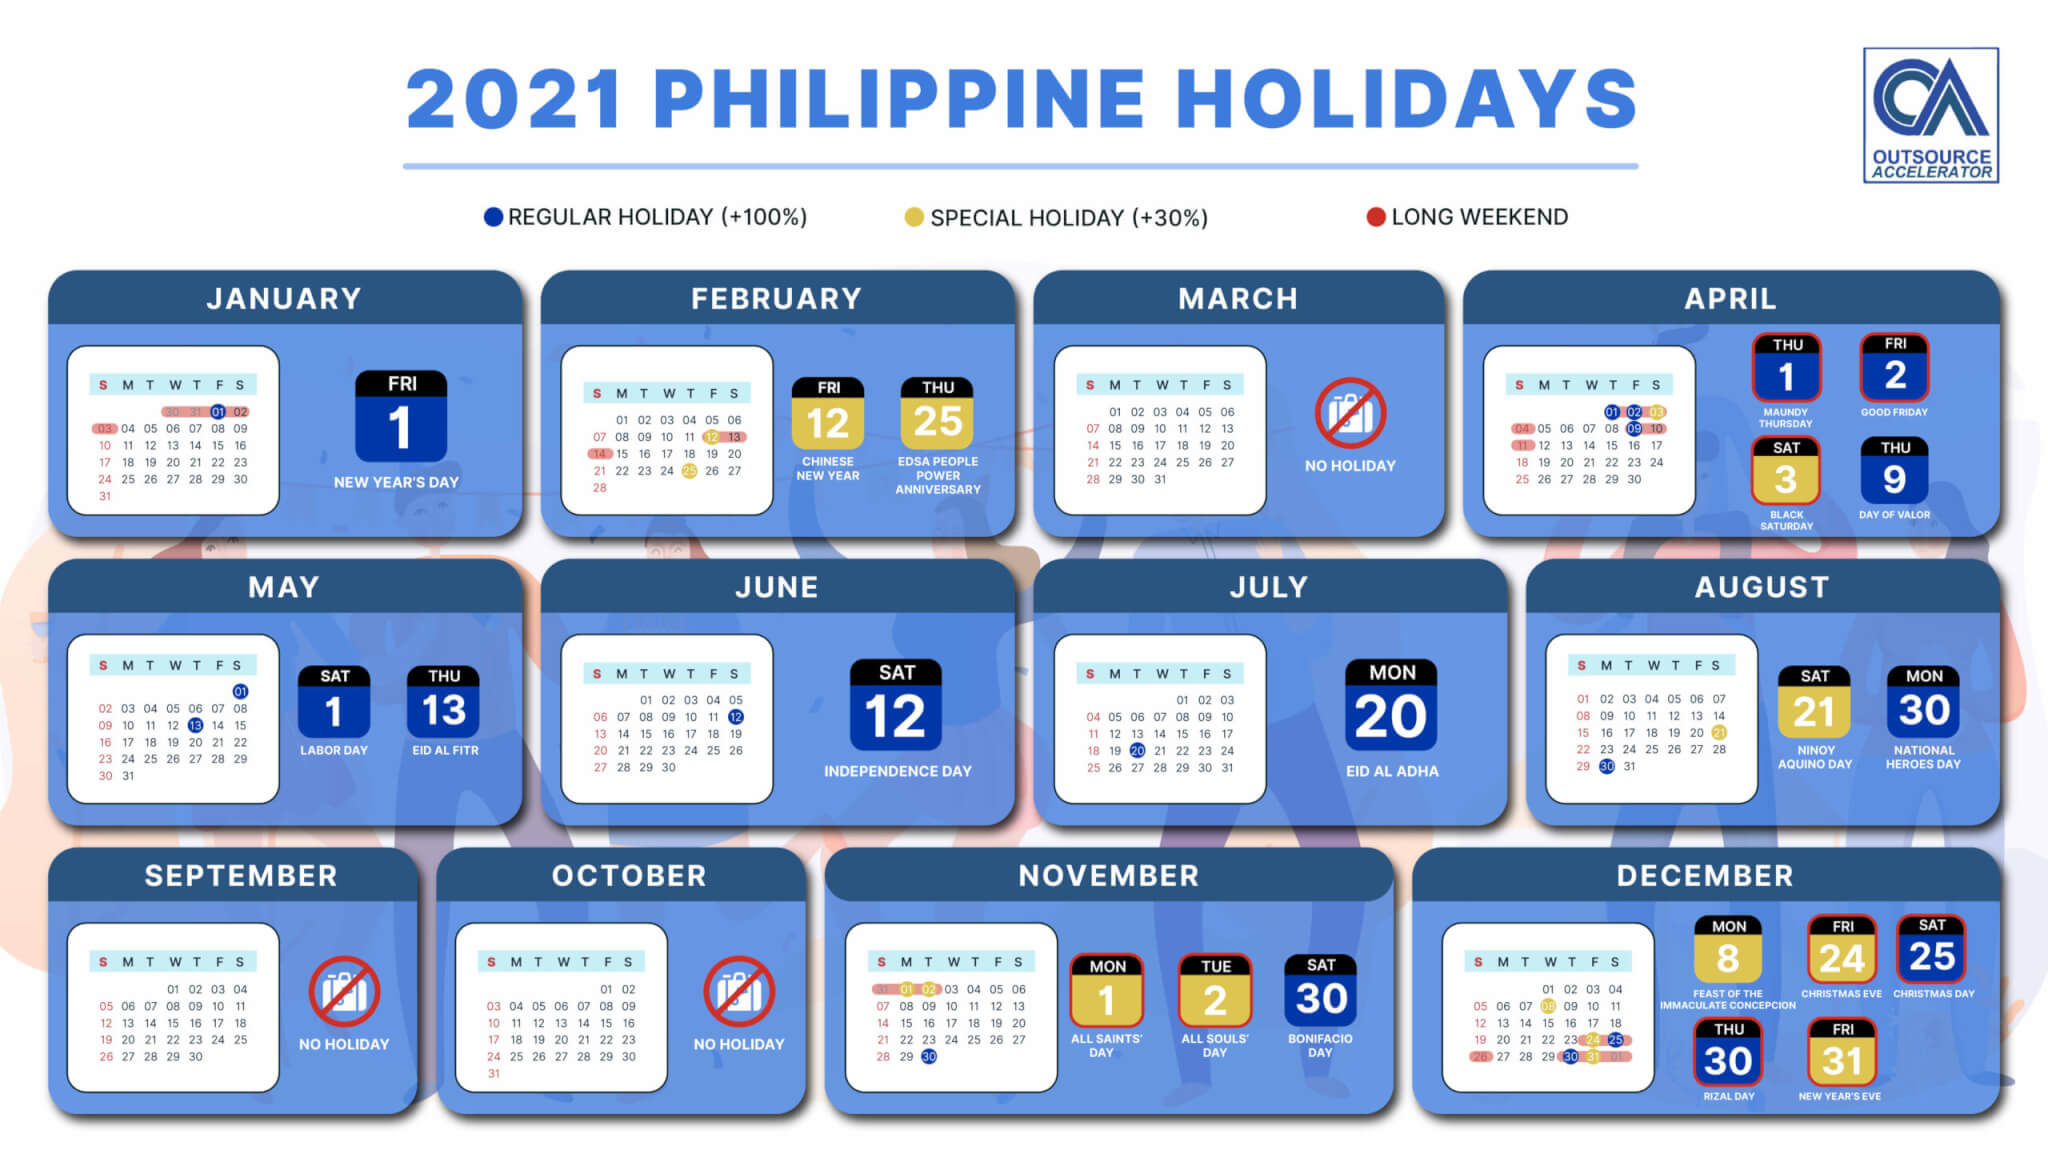 Philippine Holidays 2021 | Outsource Accelerator